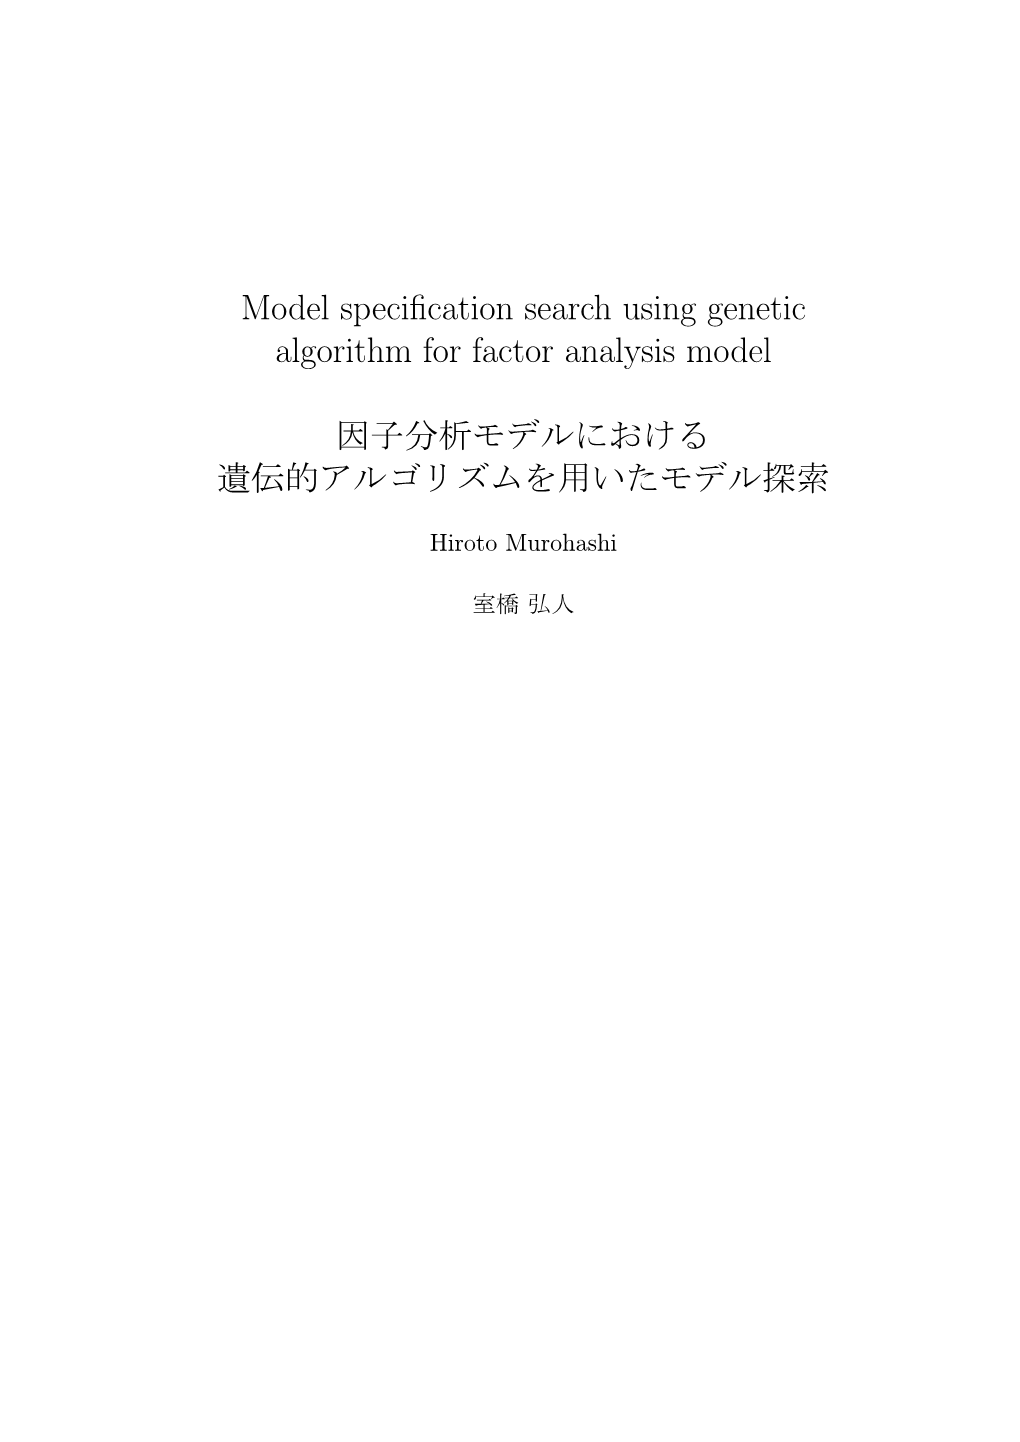 Model Specification Search Using Genetic Algorithm for Factor Analysis